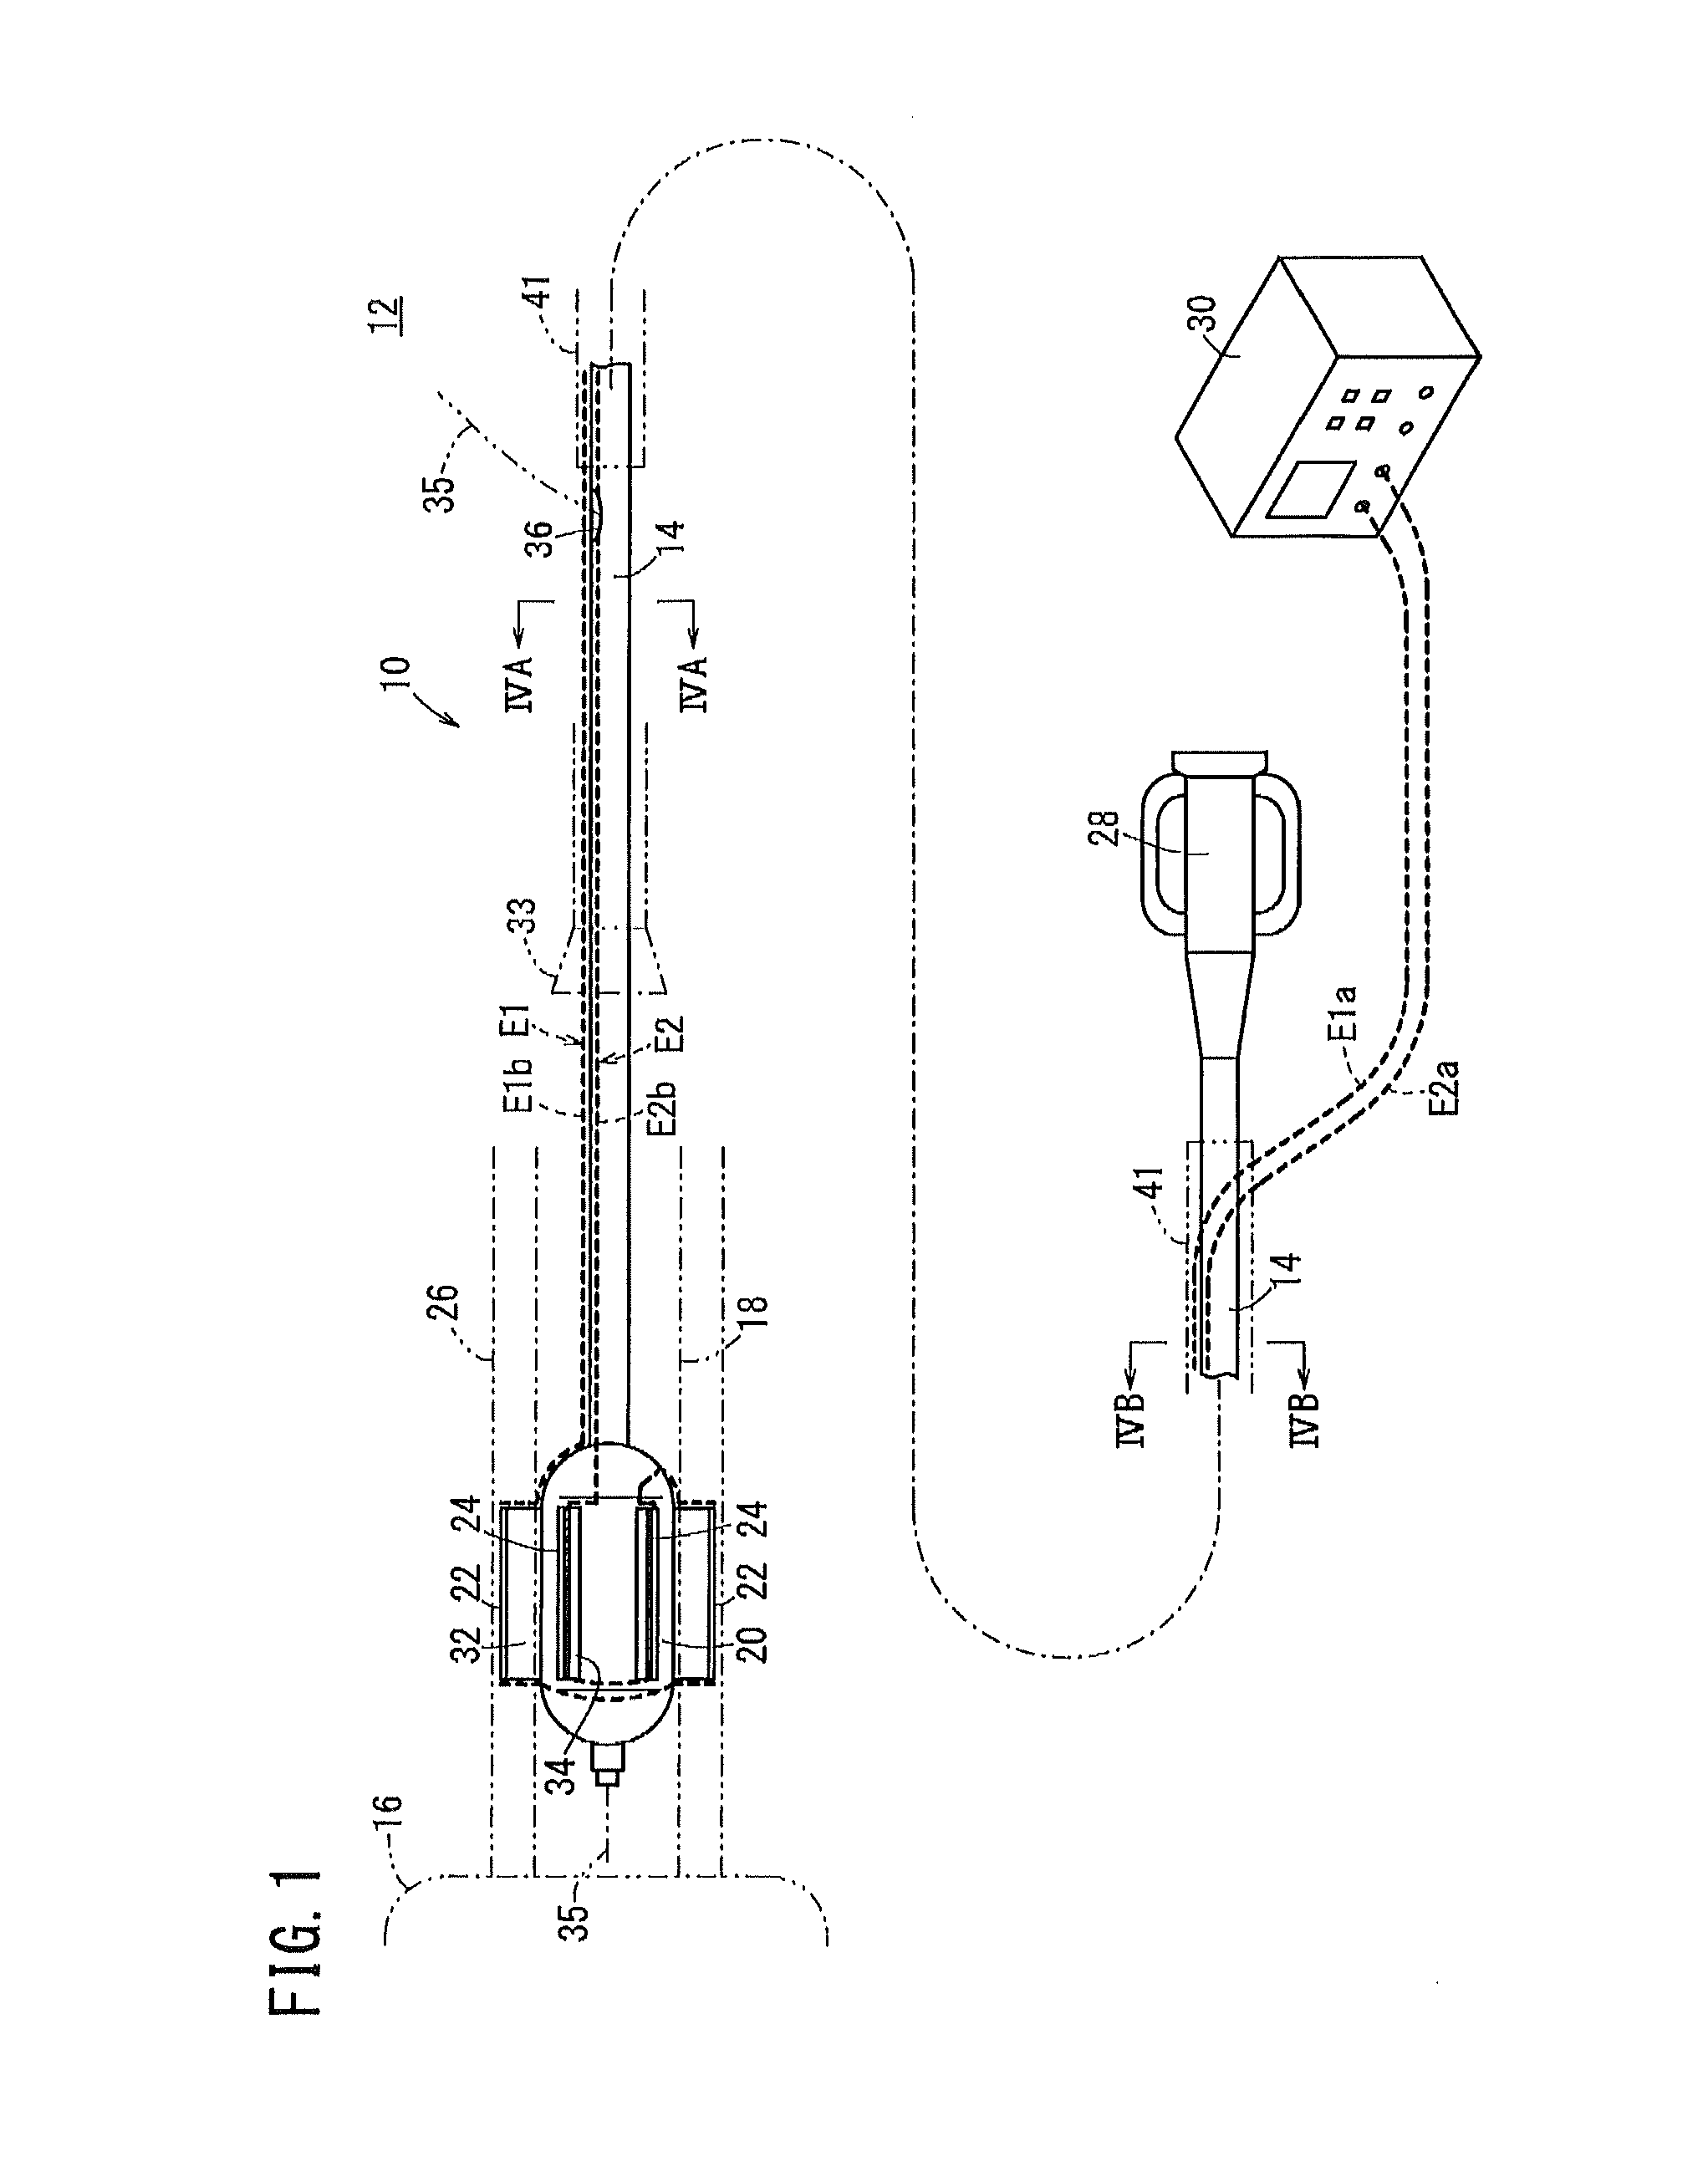 Method of treating a living body tissue